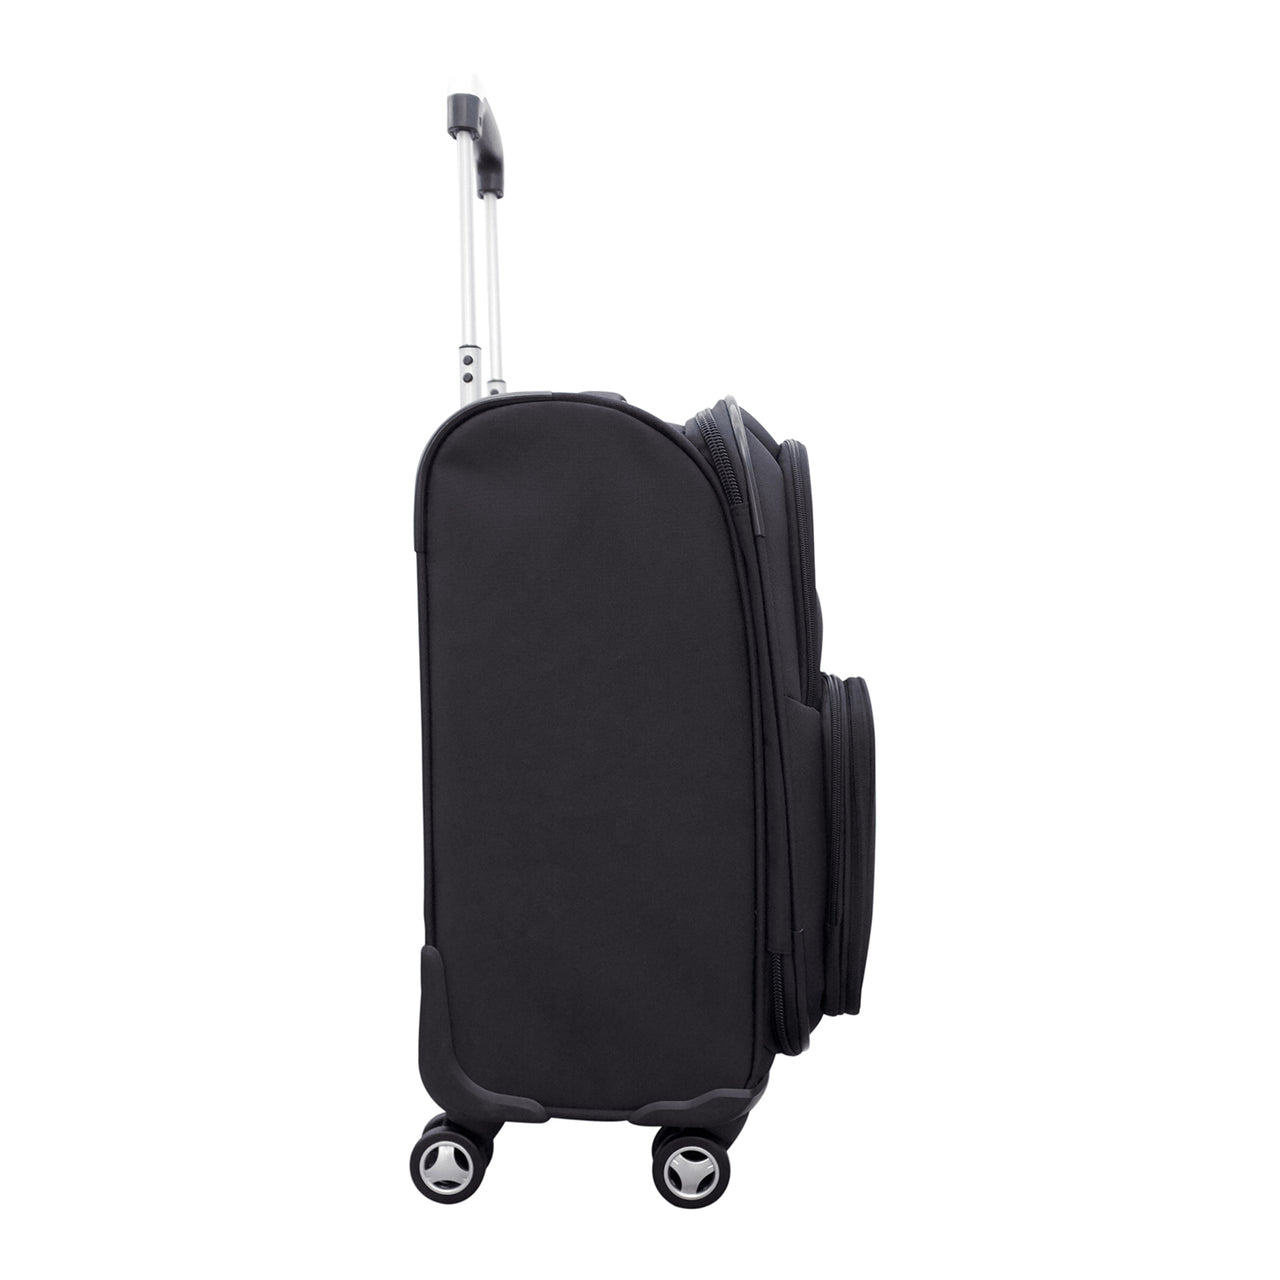 Rangers Luggage | New York Rangers 20" Carry-on Spinner Luggage